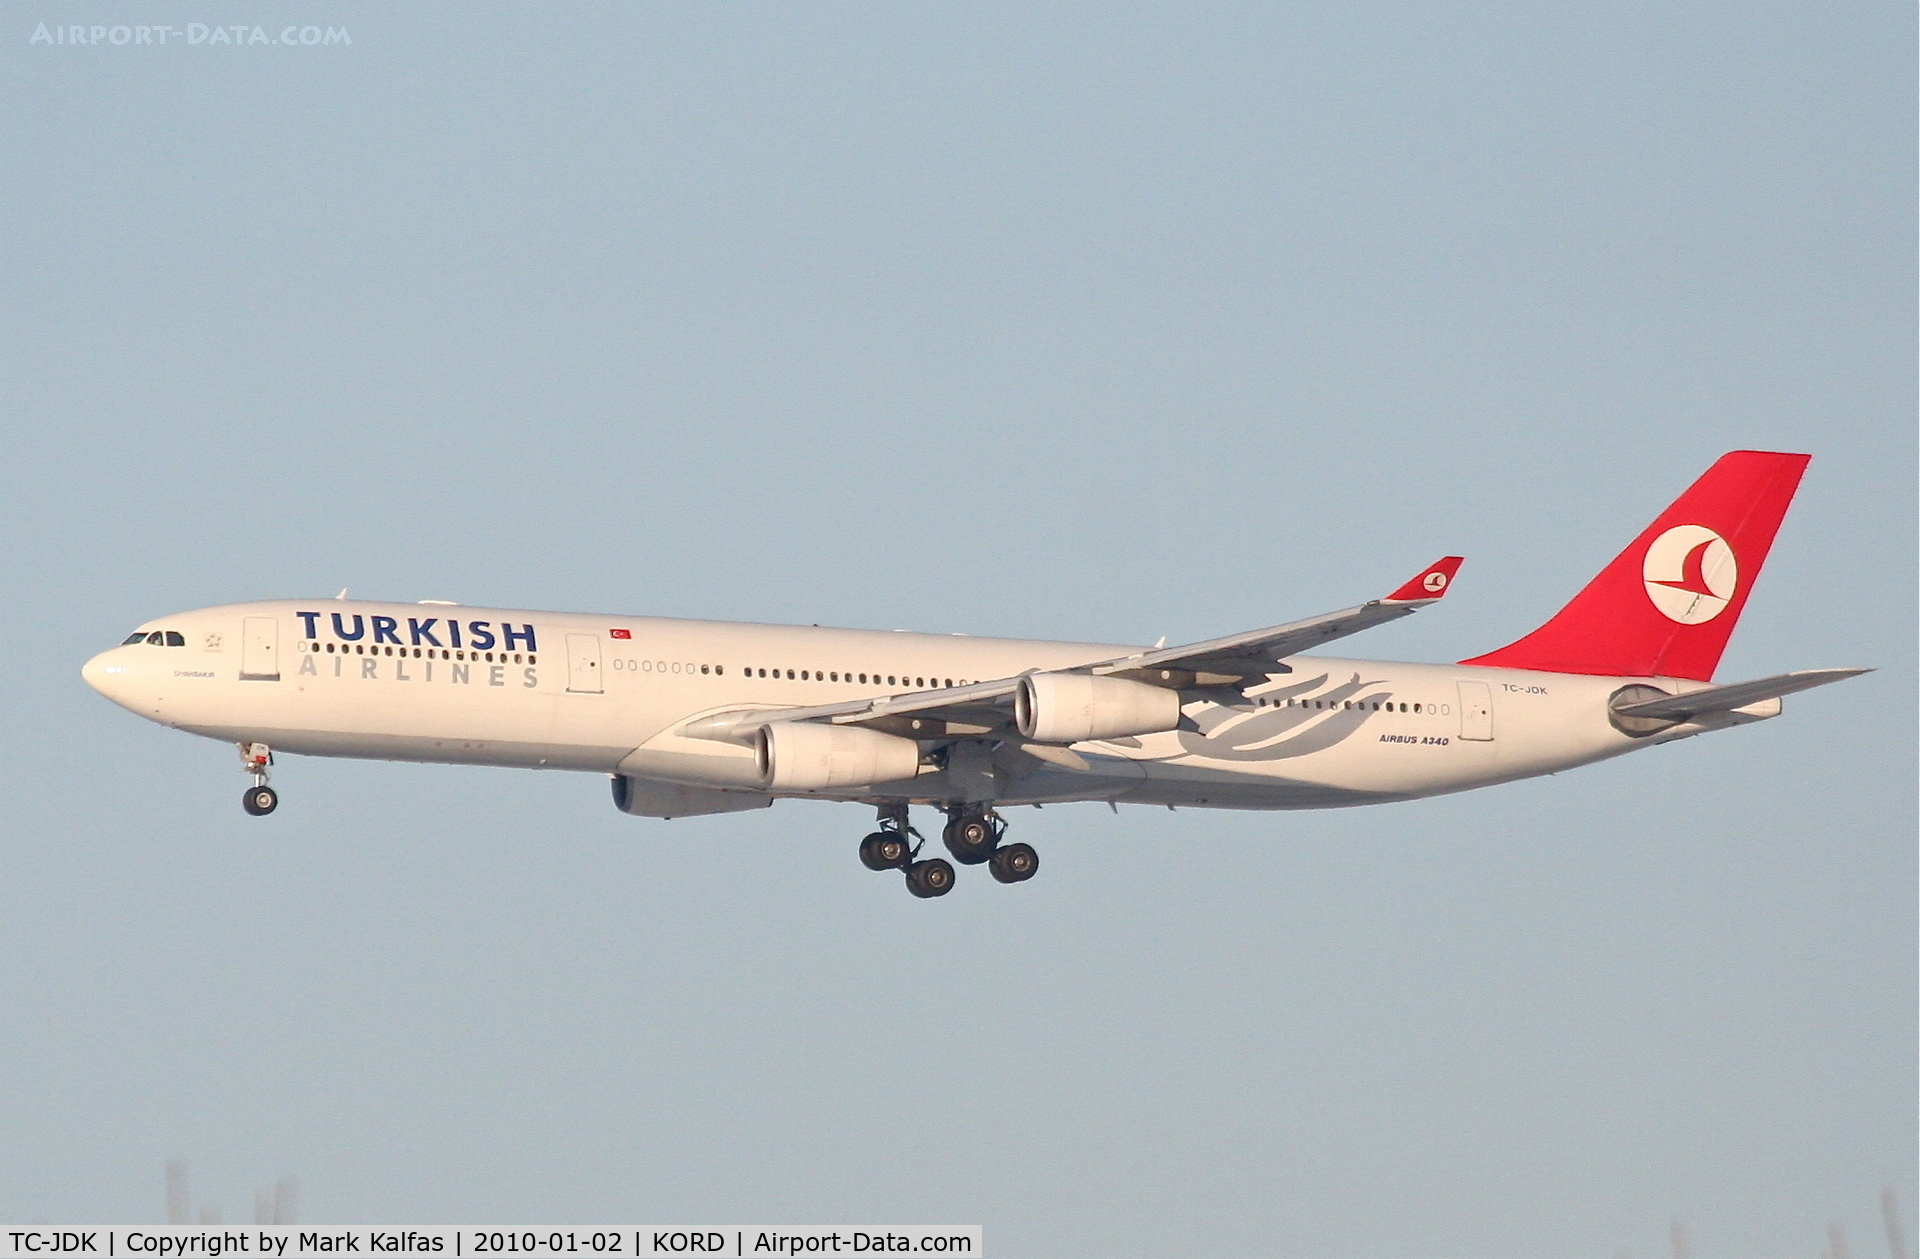 TC-JDK, 1993 Airbus A340-311 C/N 025, Turkish Airlines A340-311, THY5, arriving 27L KORD from LTBA (Istanbul).